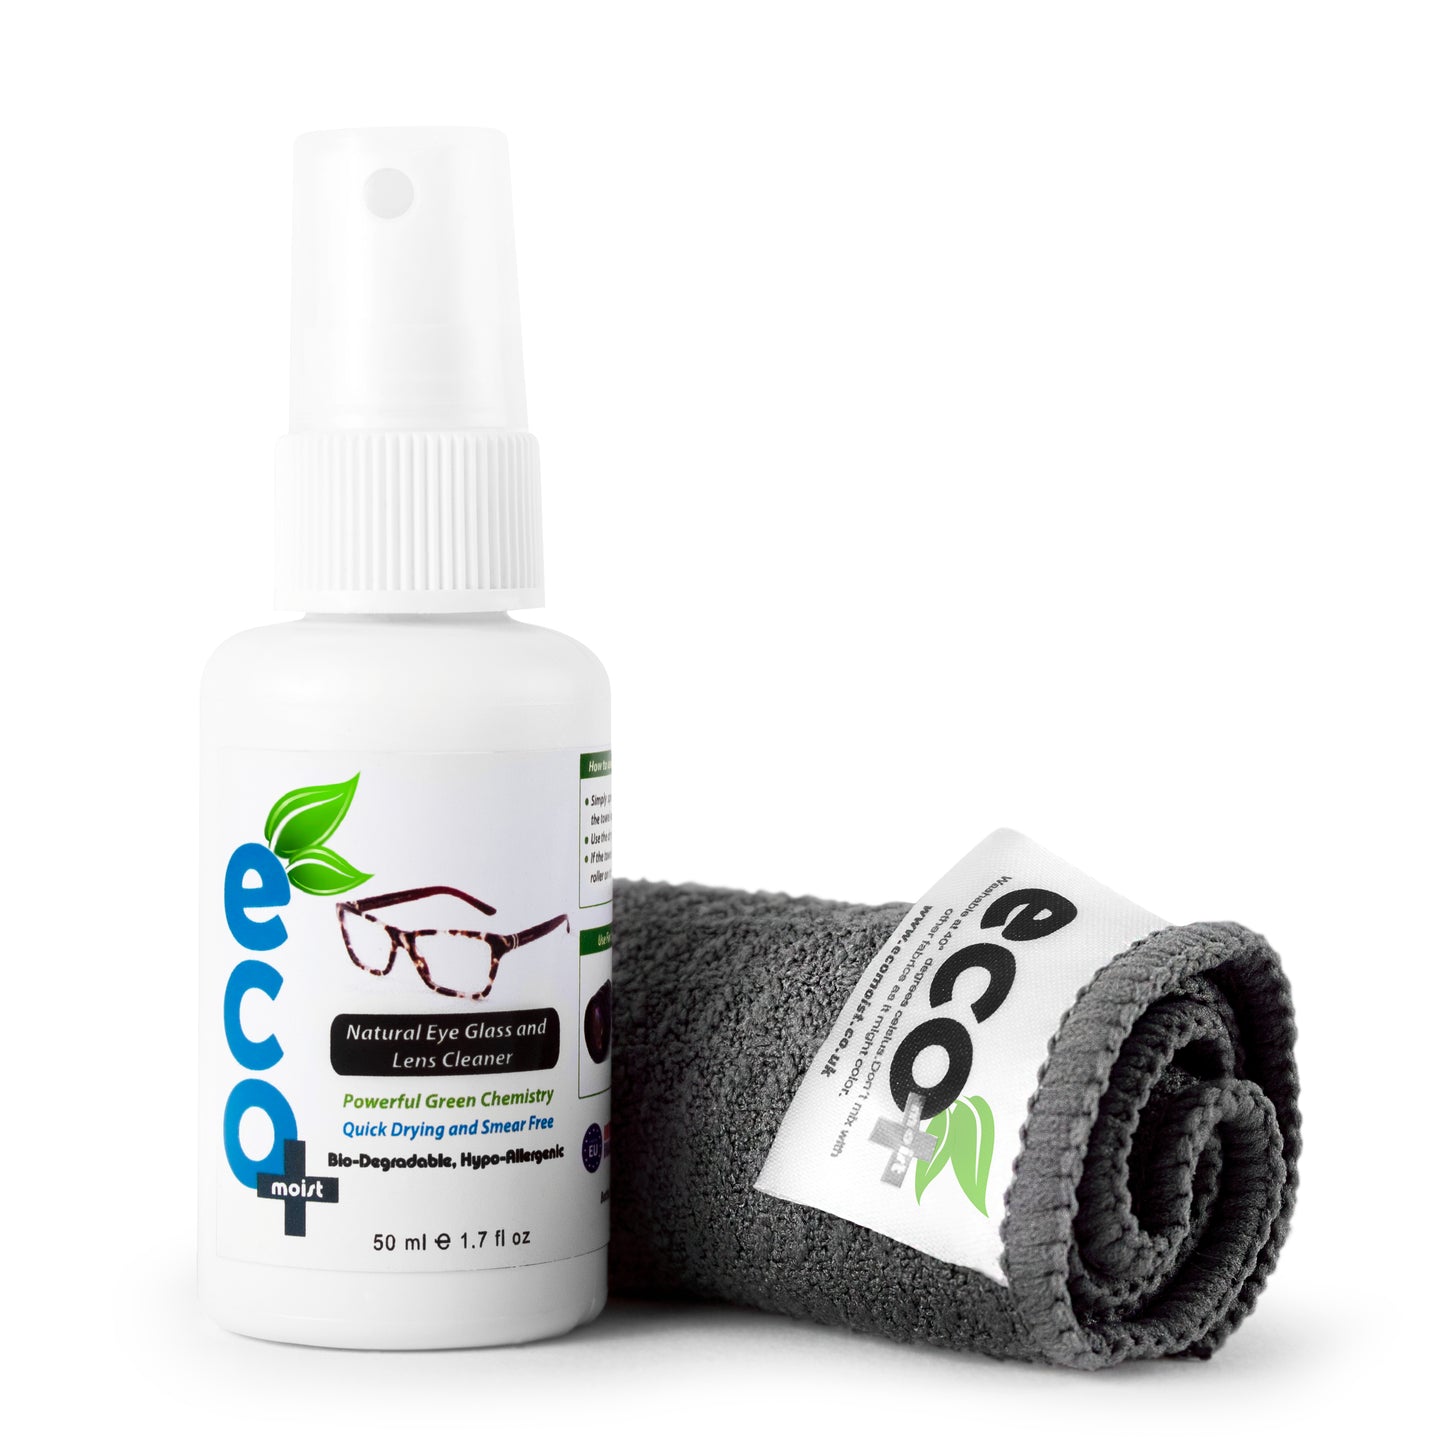 Ecomoist - Ecomoist Eyeglass and Lens Cleaner is a natural, biodegradable  and hypo-allergenic cleaner, to be used on all normal eyeglasses, reading  glasses, sunglasses, camera lenses, and other optical lenses. The formula